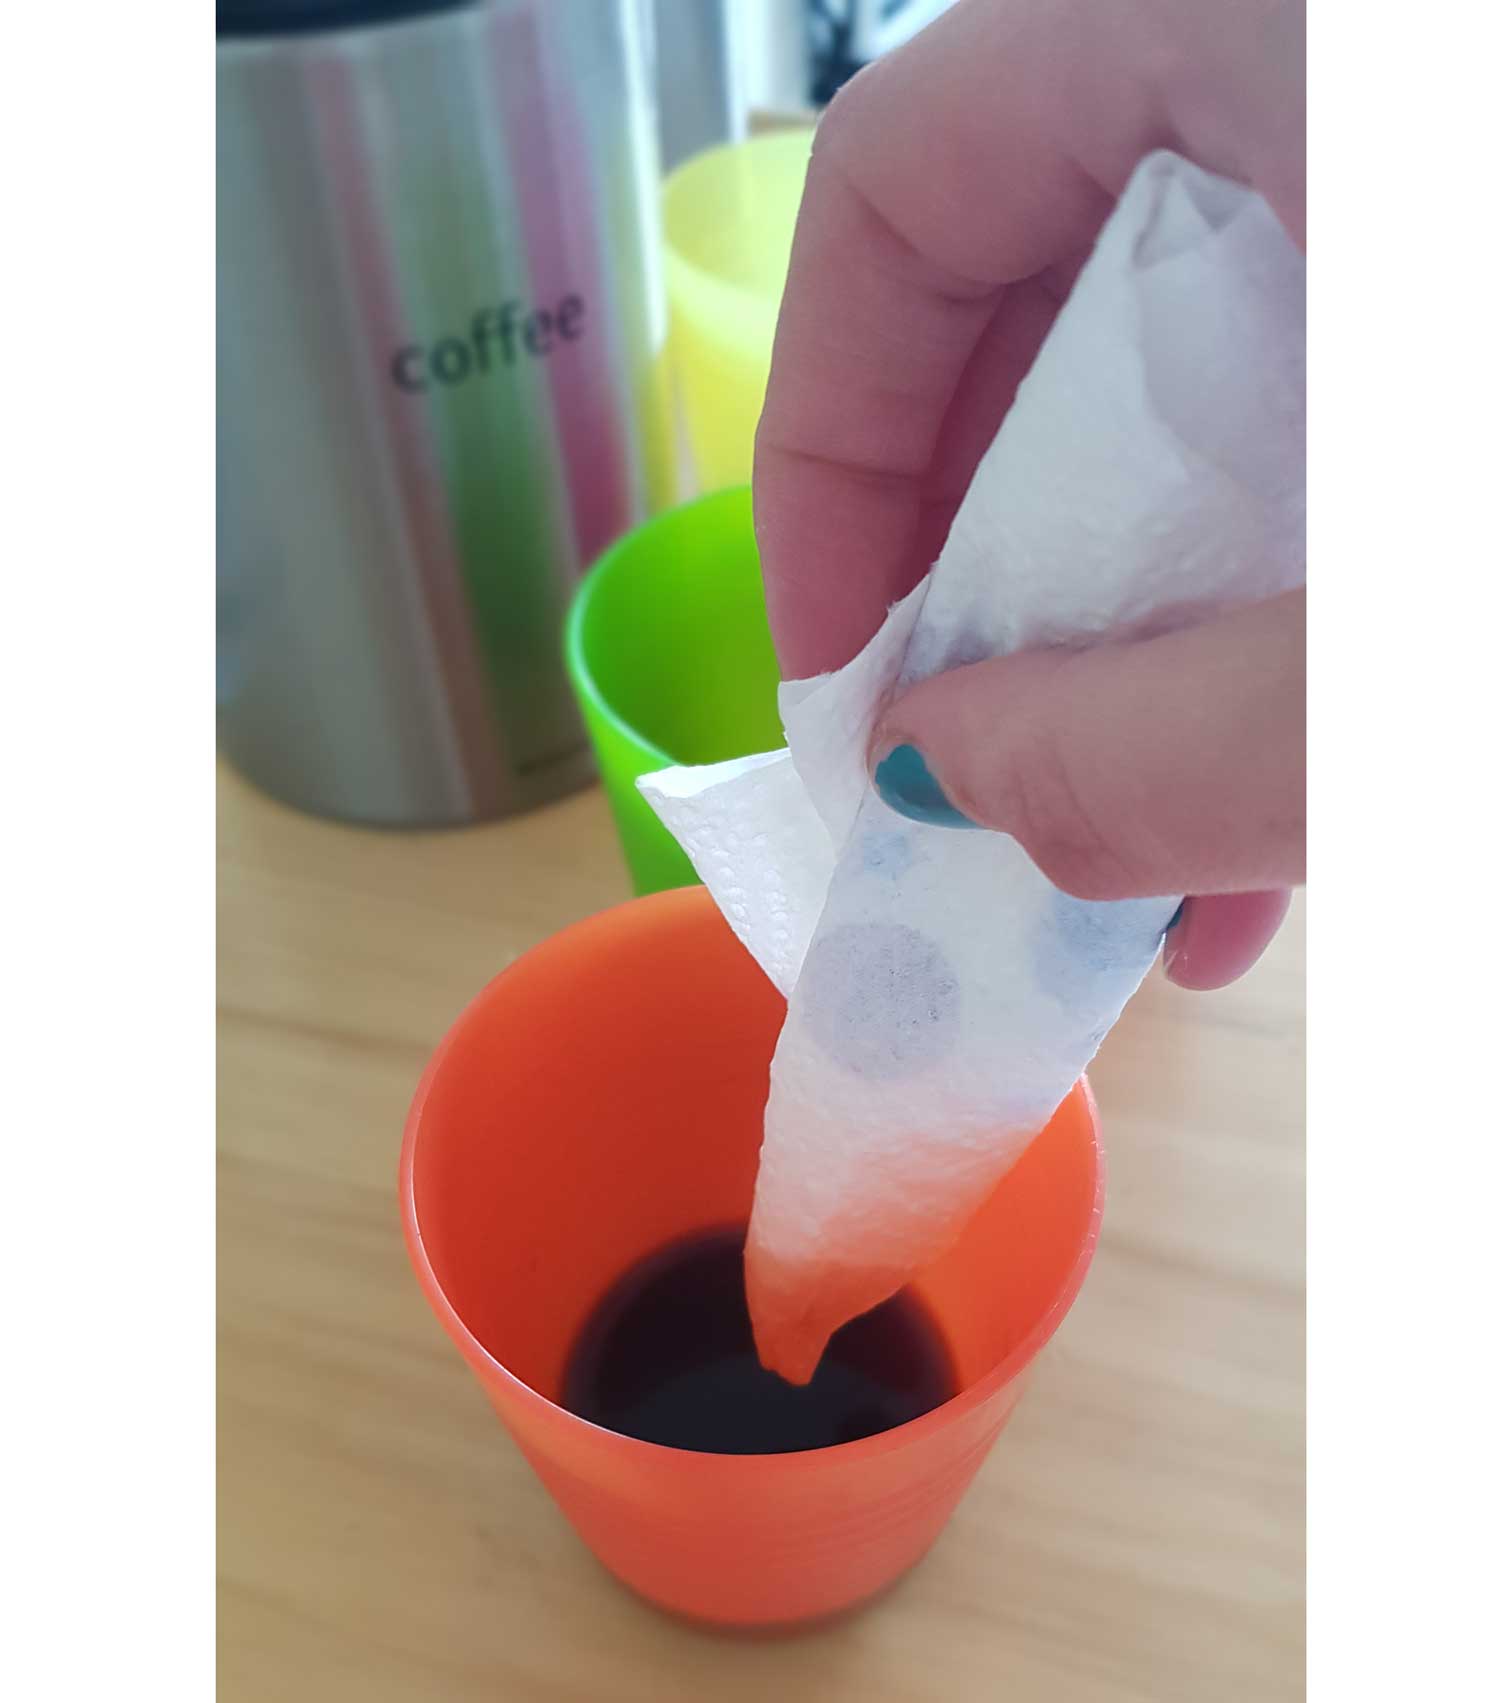 A roll of kitchen roll being dipped into a cup of tea.